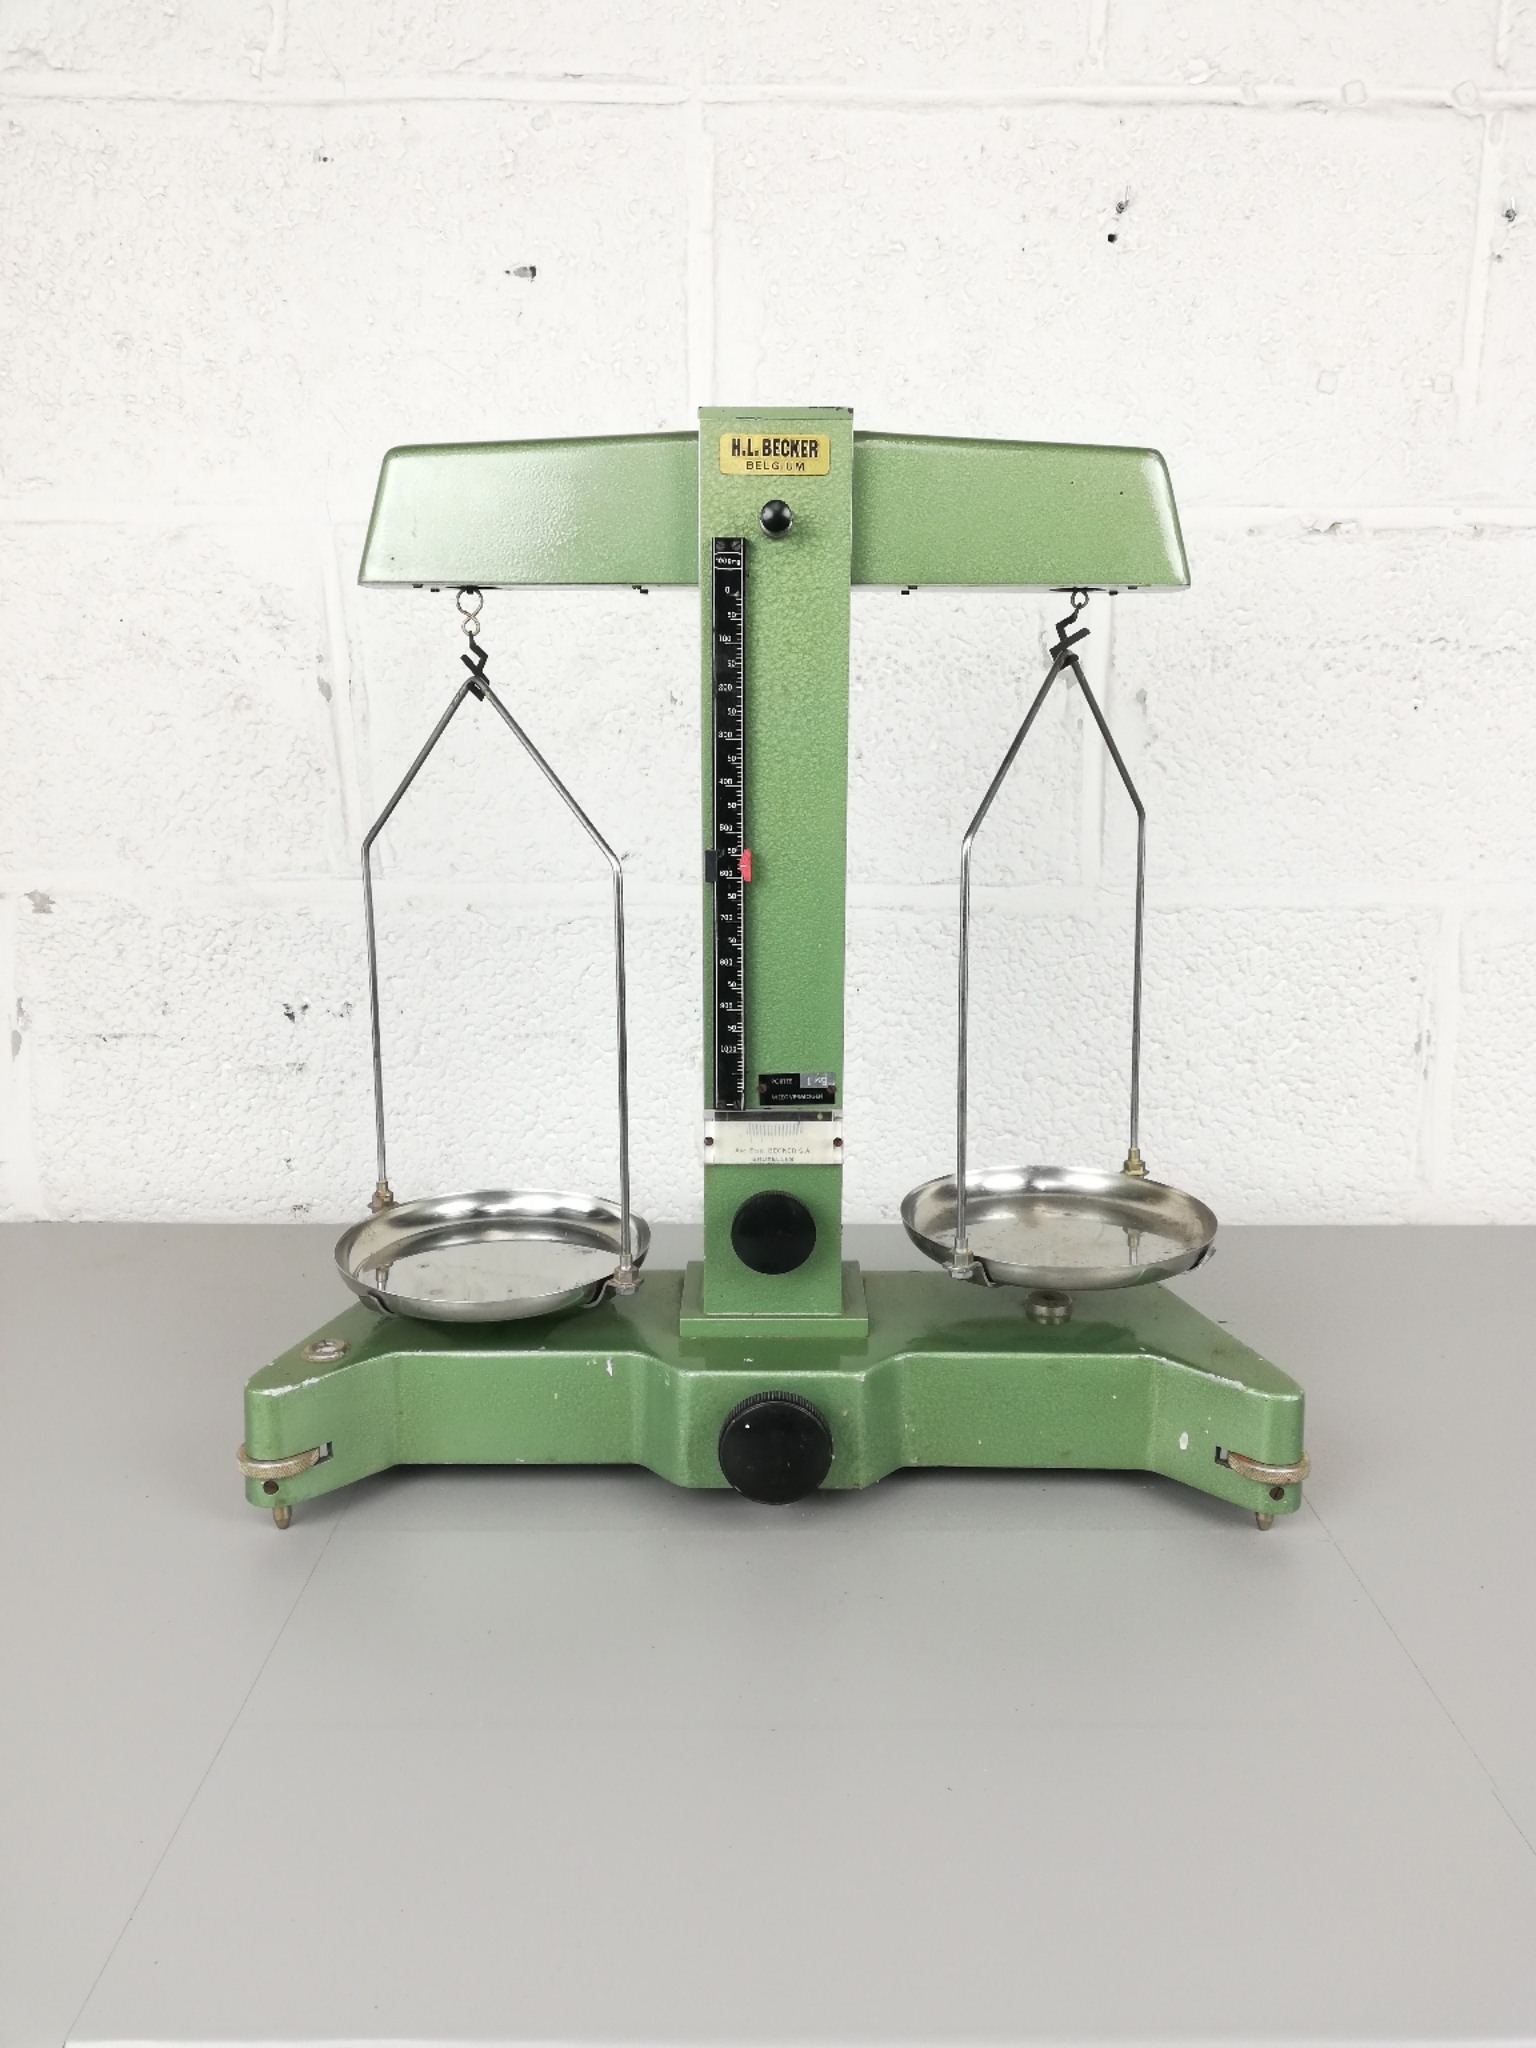 Old H.L. Becker pharmacist scales